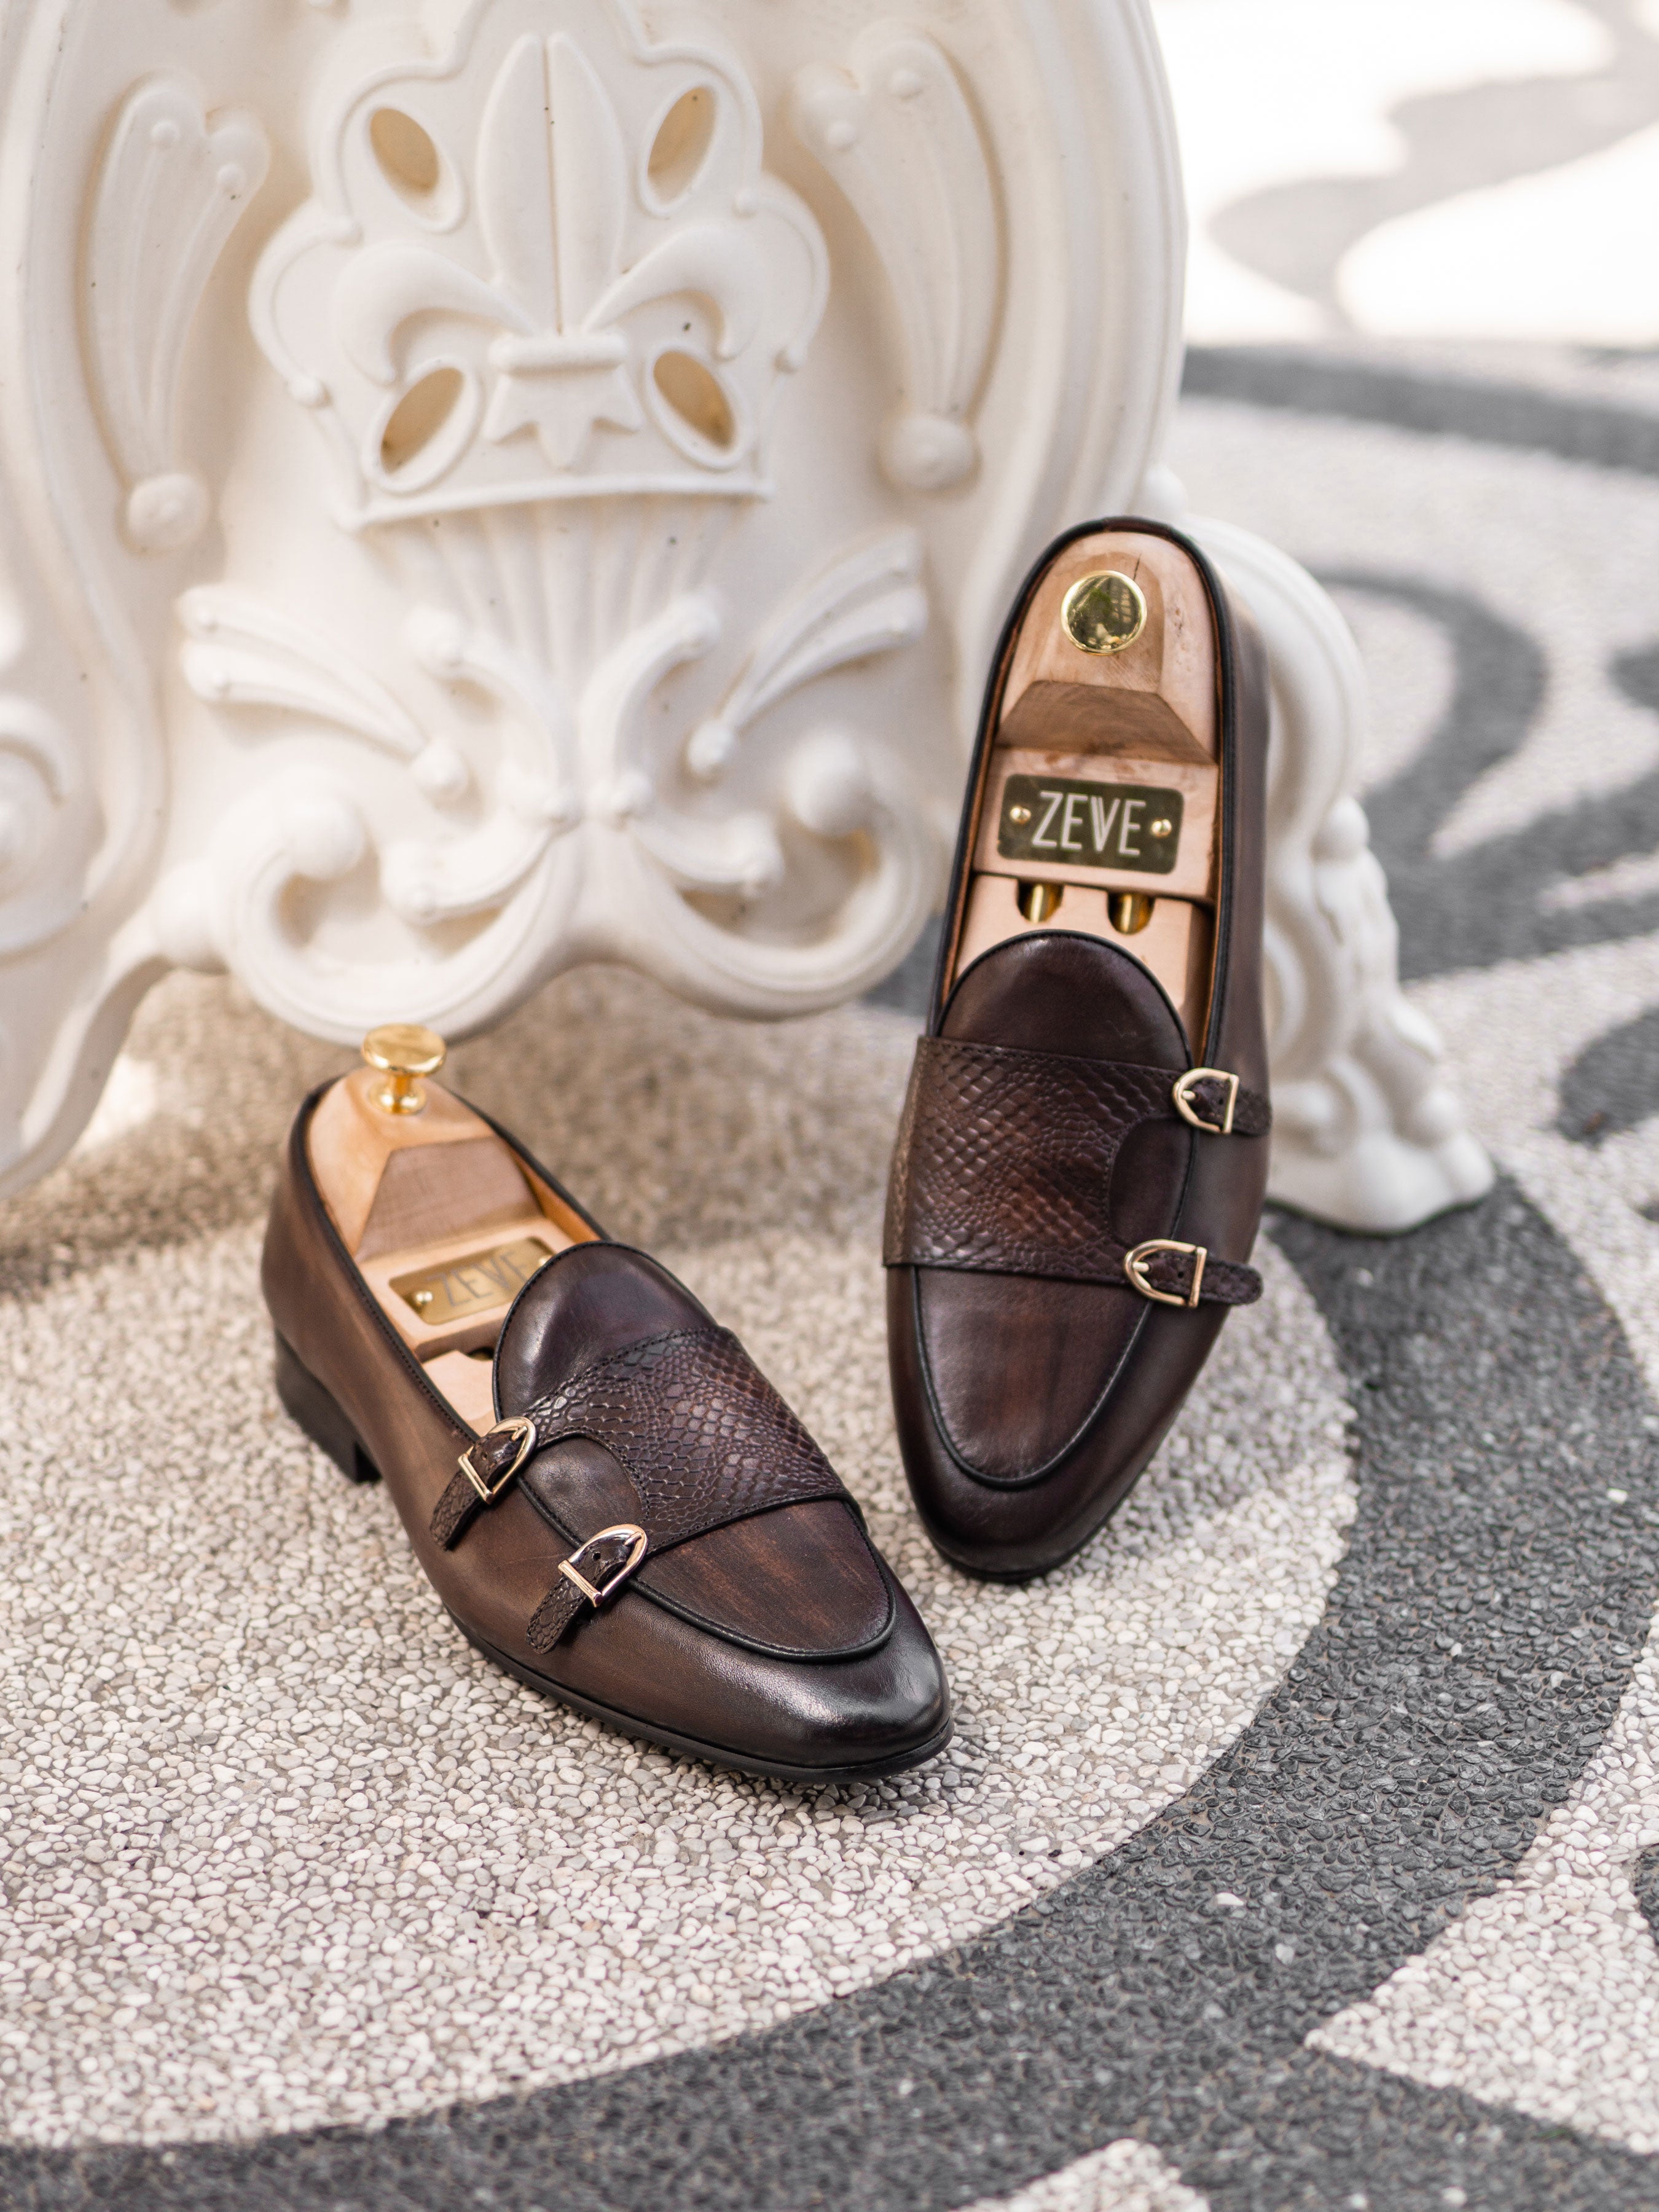 Belgian Loafer - Dark Brown Snake Skin Double Monk Strap (Hand Painted Patina) - Zeve Shoes